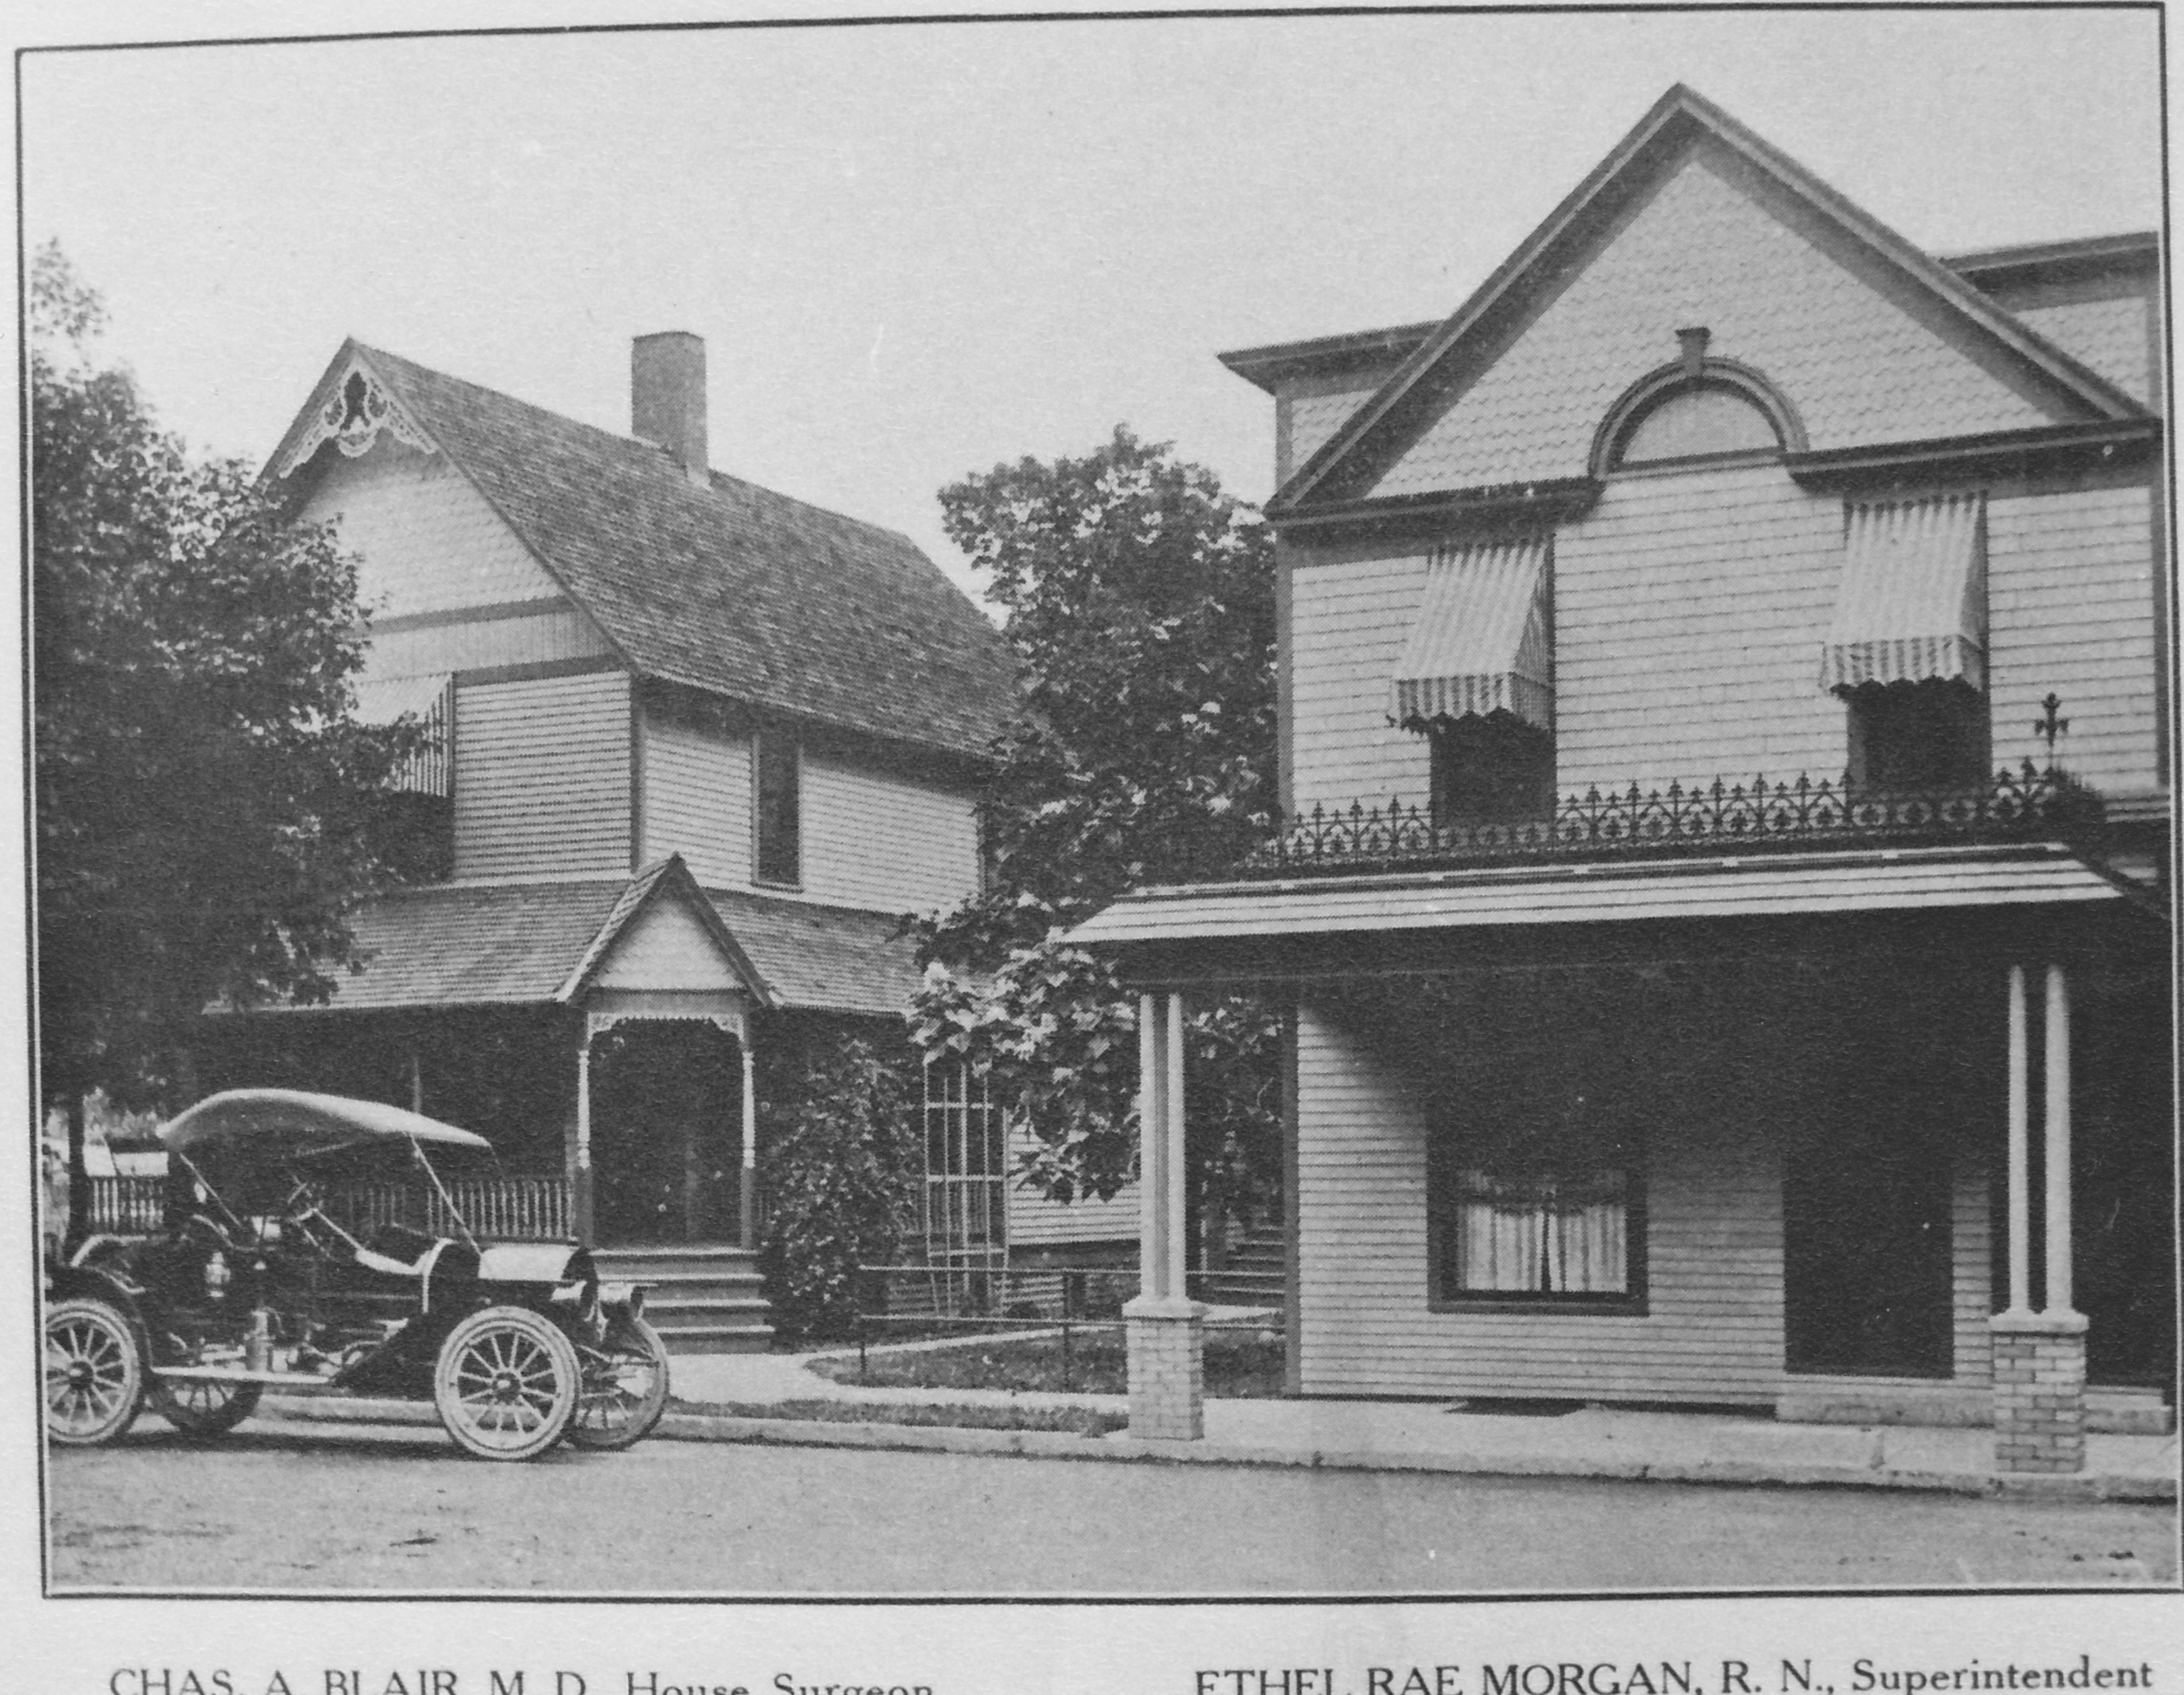 Dr. C. A. Blair’s home and Hal C. Blair Memorial Hospital, built in 1908.  Home at 128 North Street, hospital just north of the newspaper office.  Home was built in 1900.